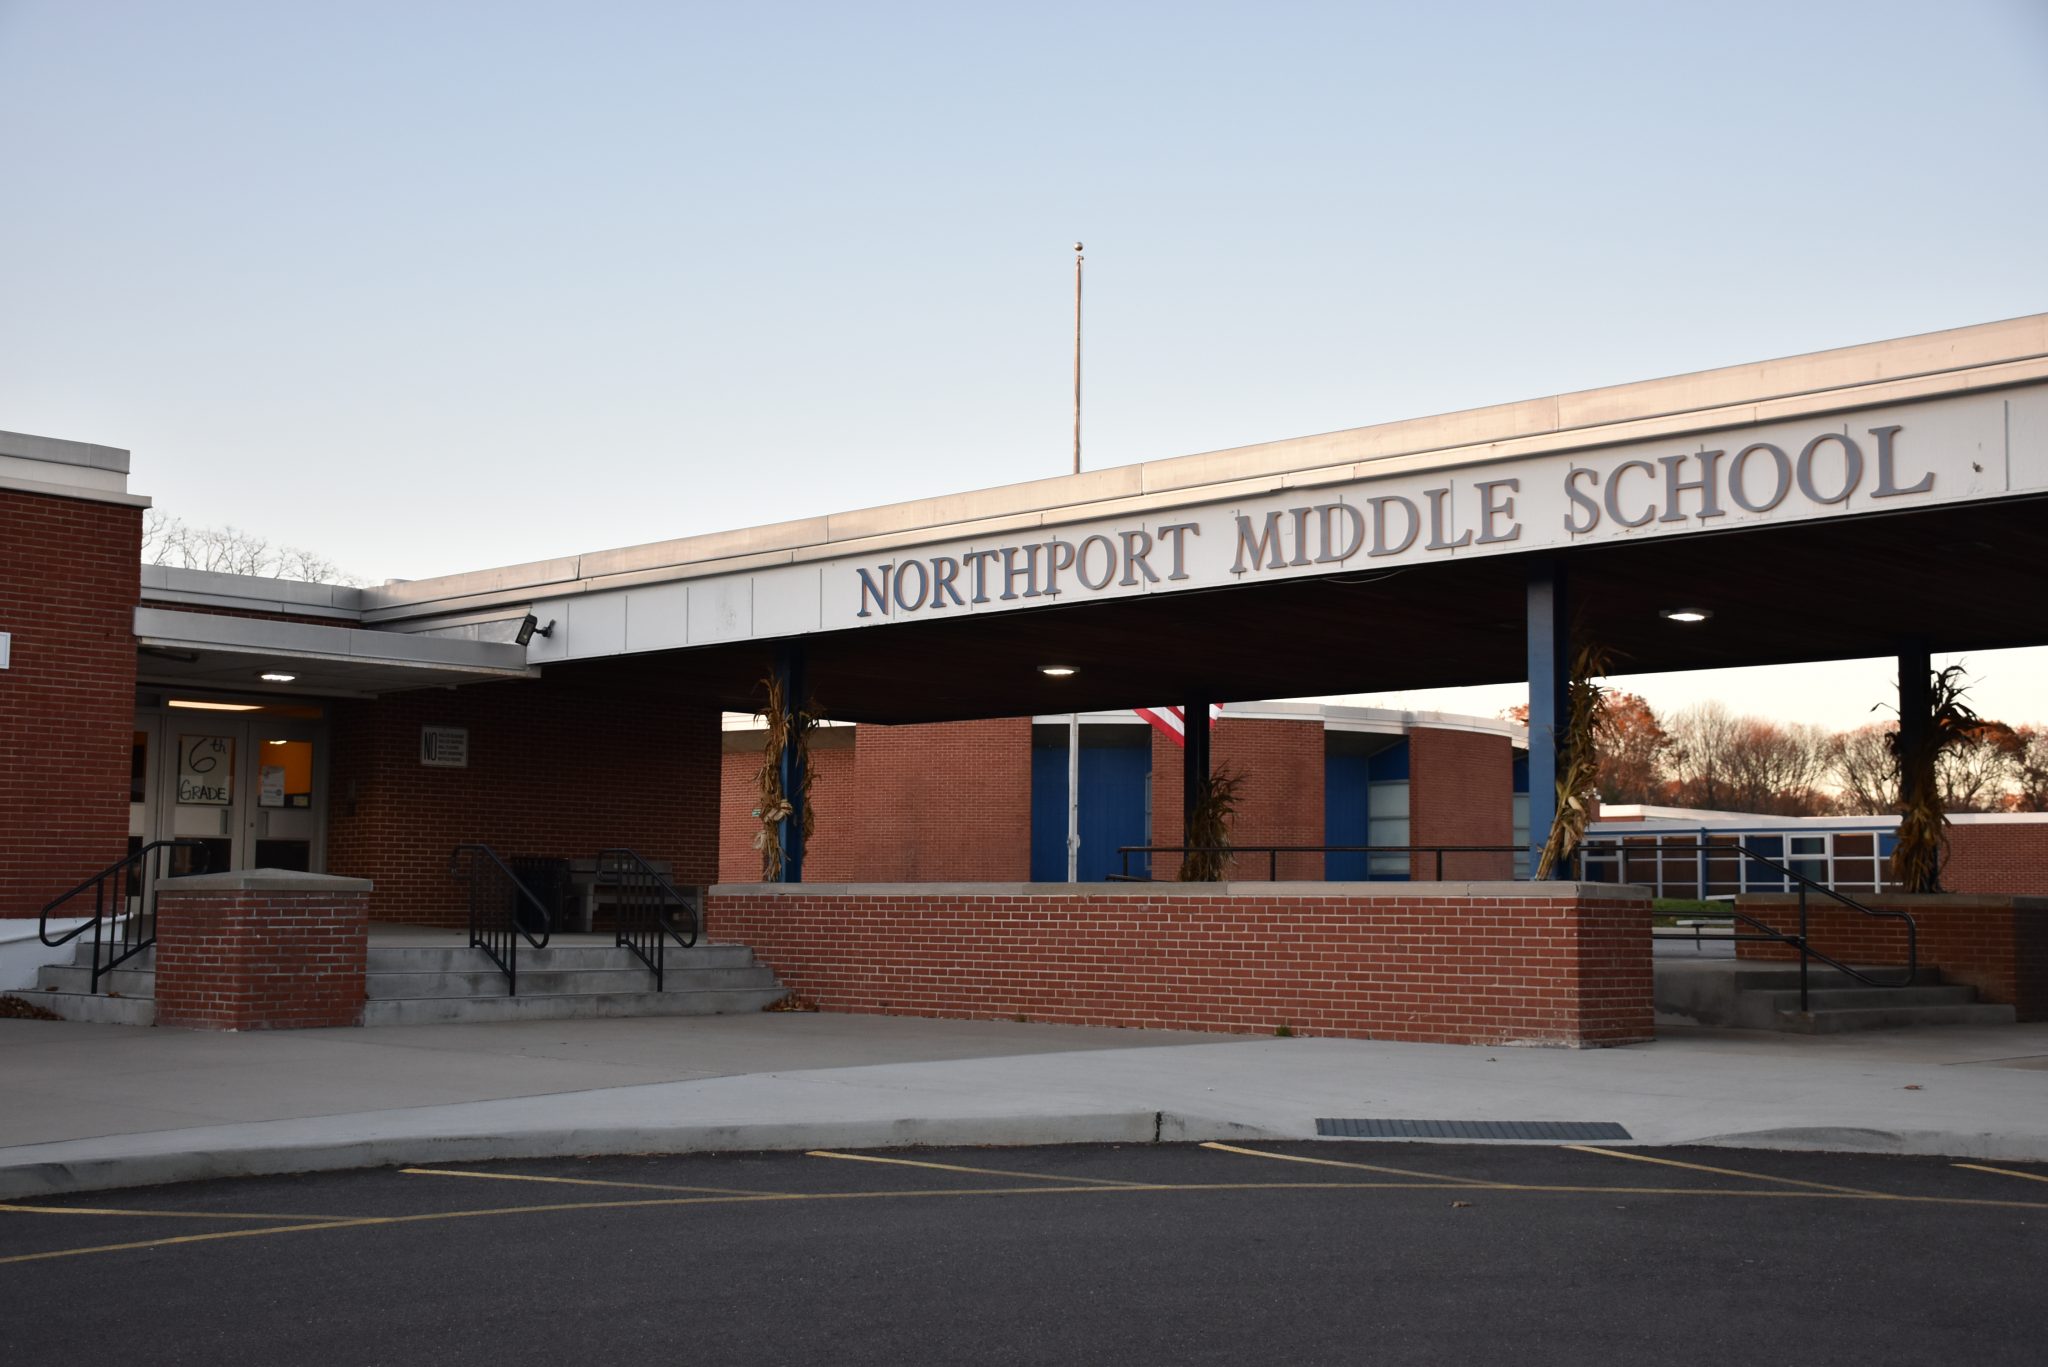 State DOH releases cancer findings on NorthportEast Northport school